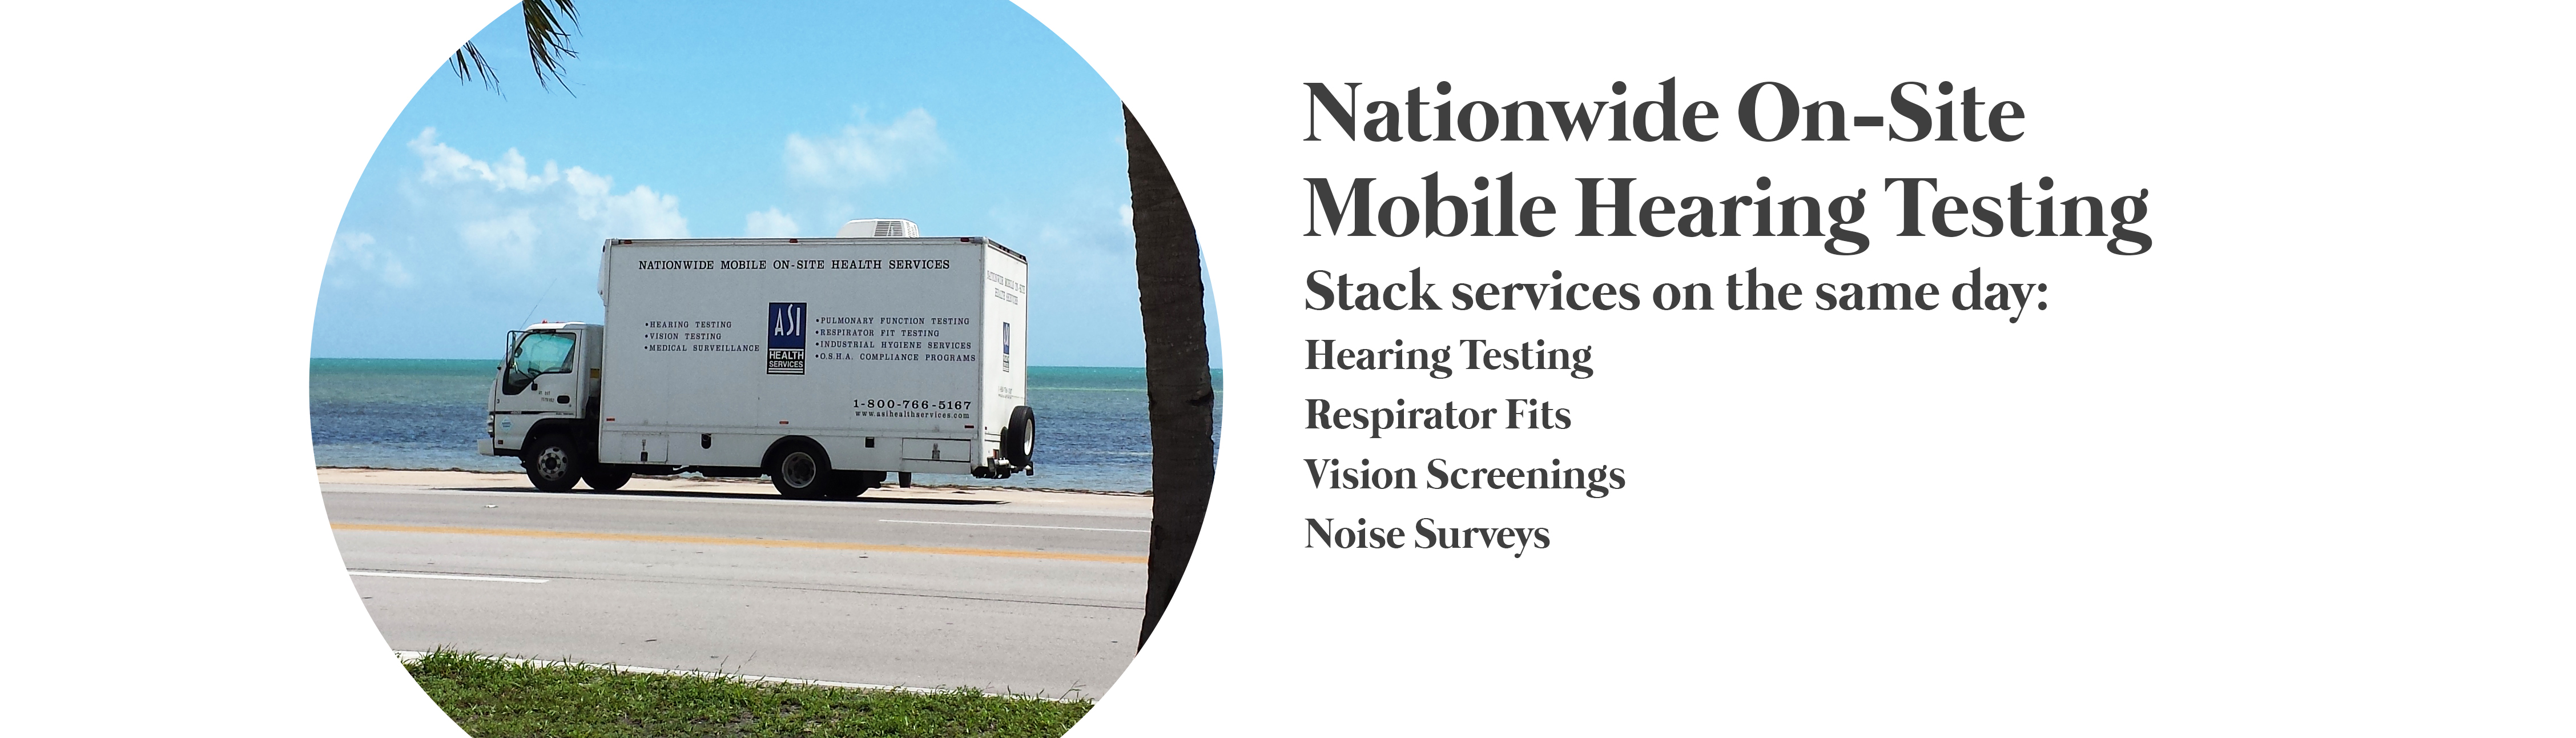 Mobile Nationwide On-Site Hearing Testing